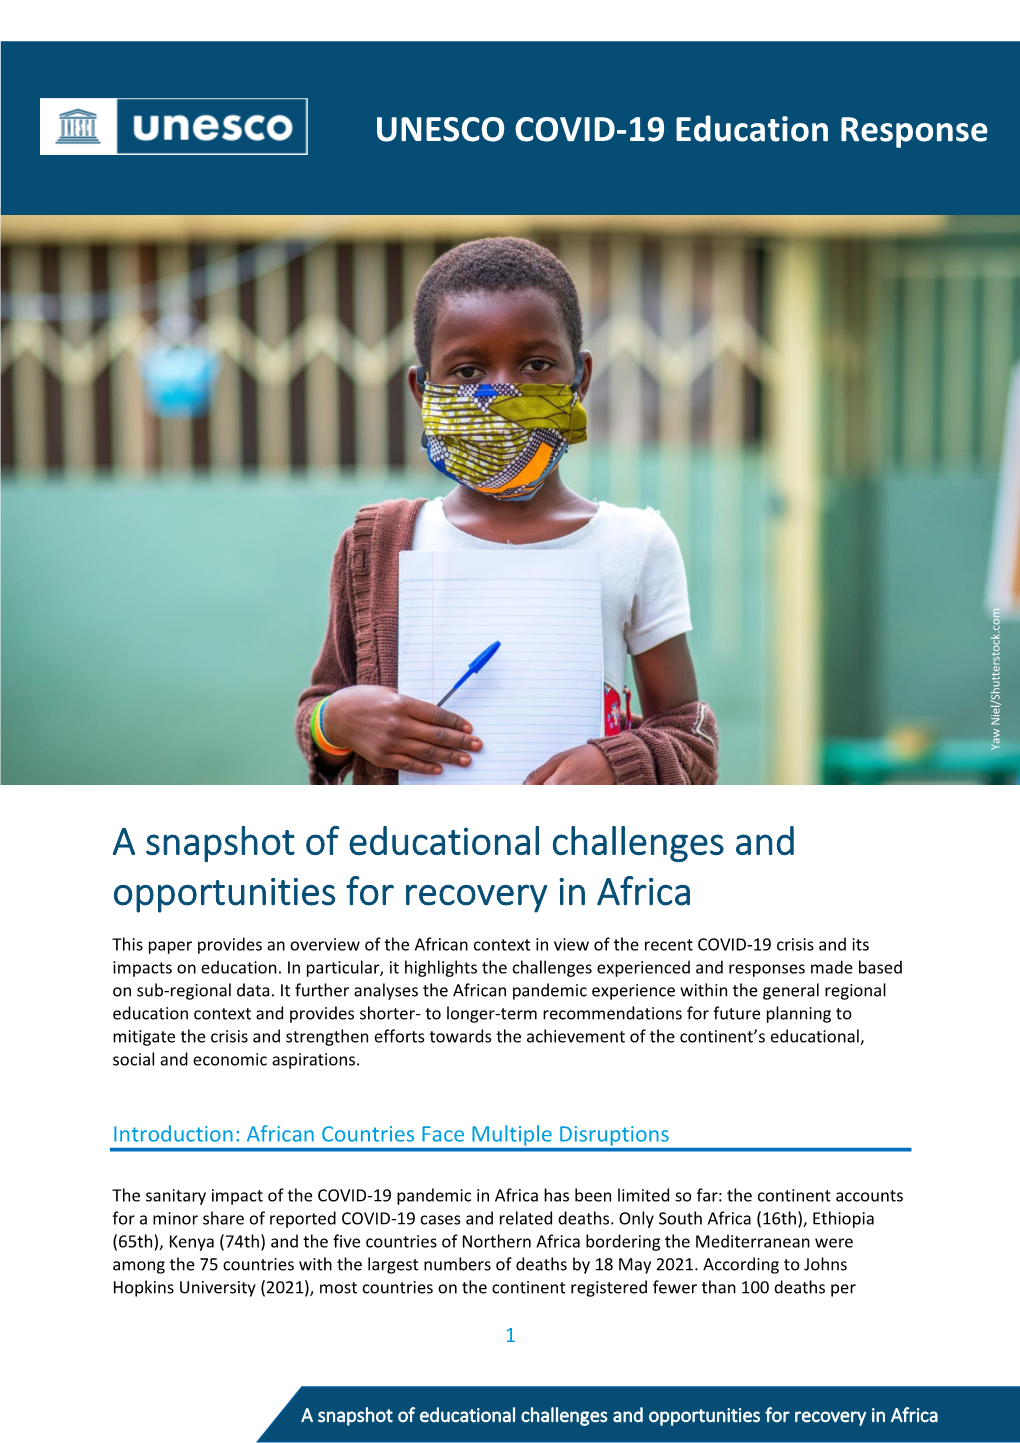 A Snapshot of Educational Challenges and Opportunities for Recovery in Africa